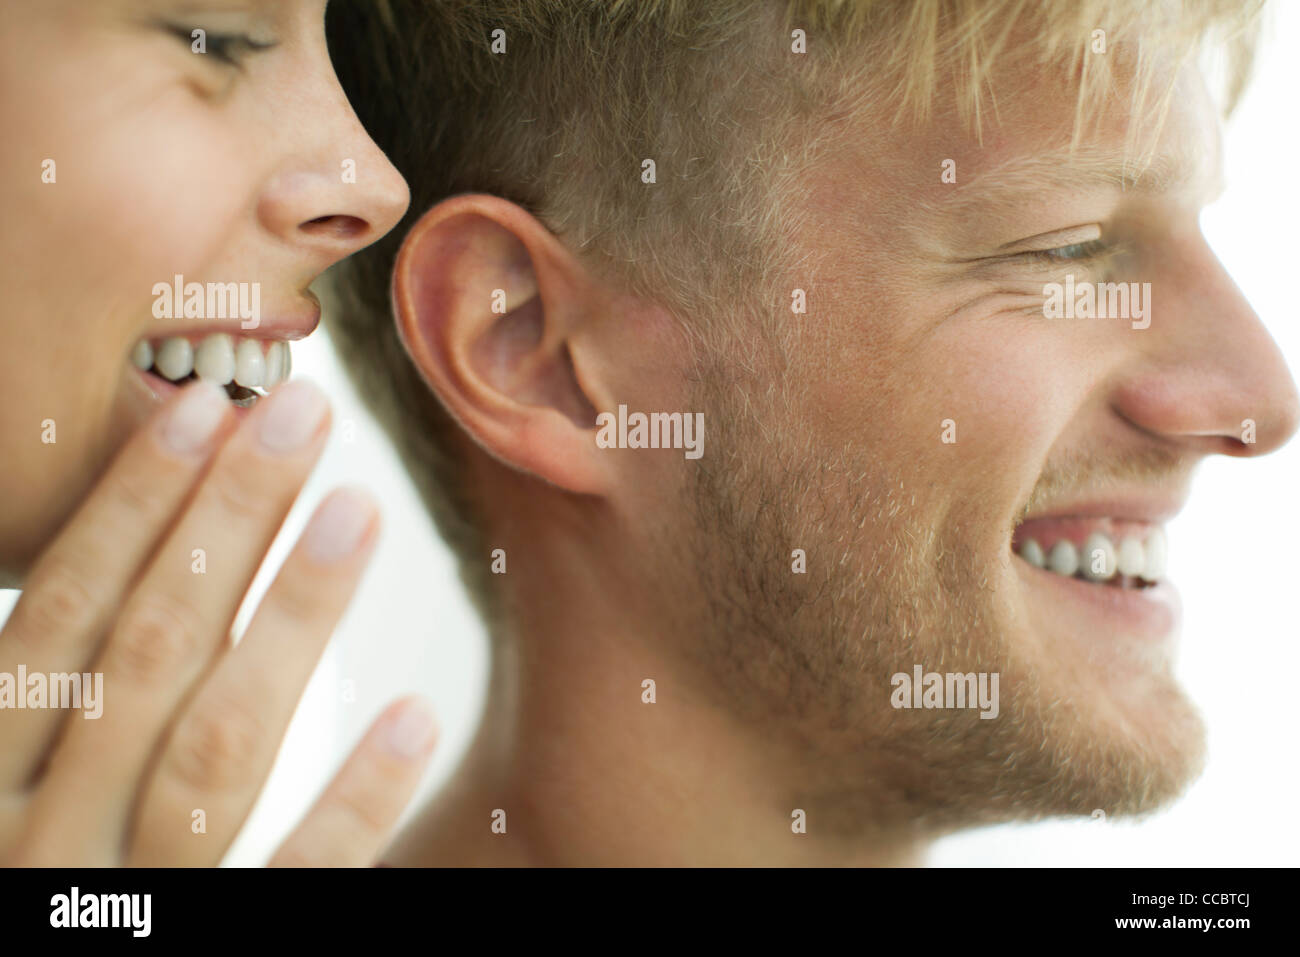 Woman whispering in man's ear, close-up Stock Photo